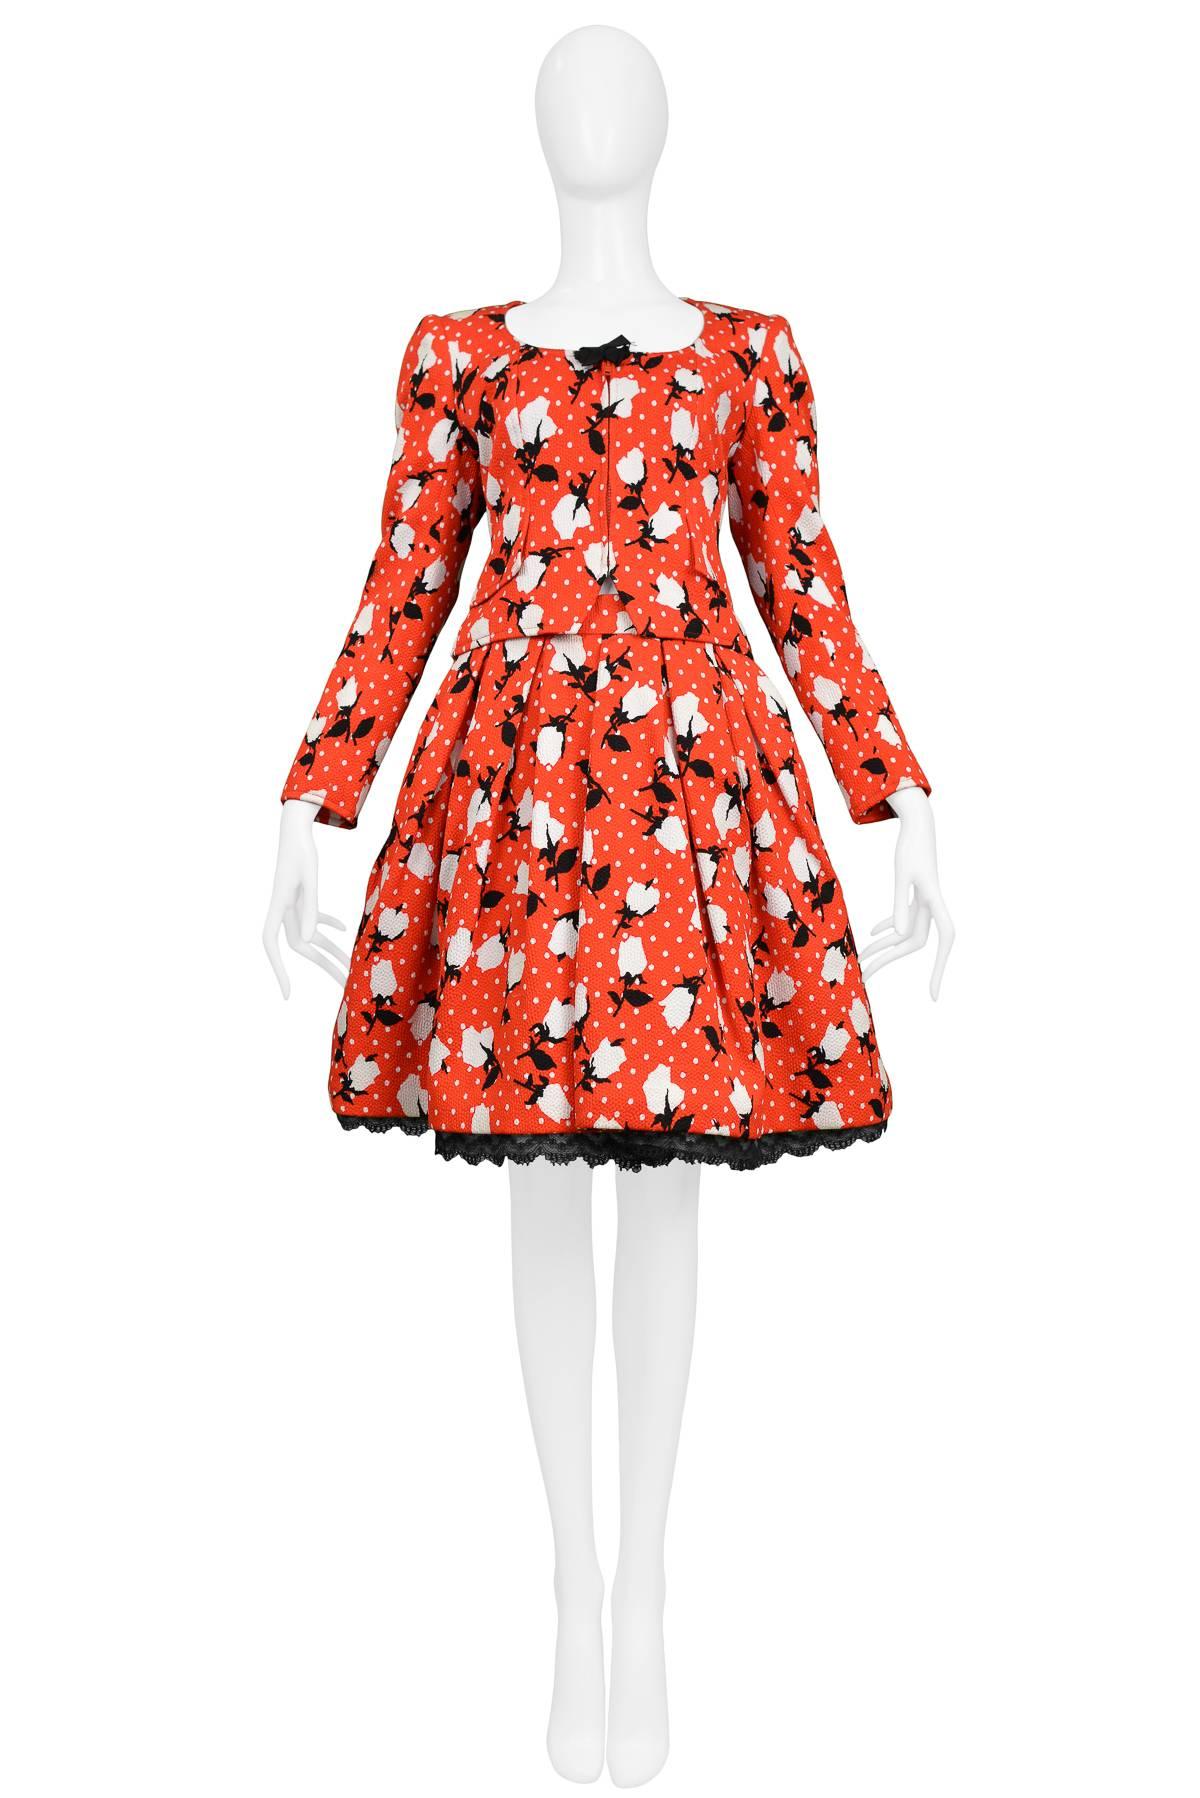 Vintage Christian Lacroix red floral ensemble featuring a matching jacket and skirt. The zip front fitted jacket is made out of an all over red, white and black floral and dot print textured cotton blend fabric and features peplum detailing at the